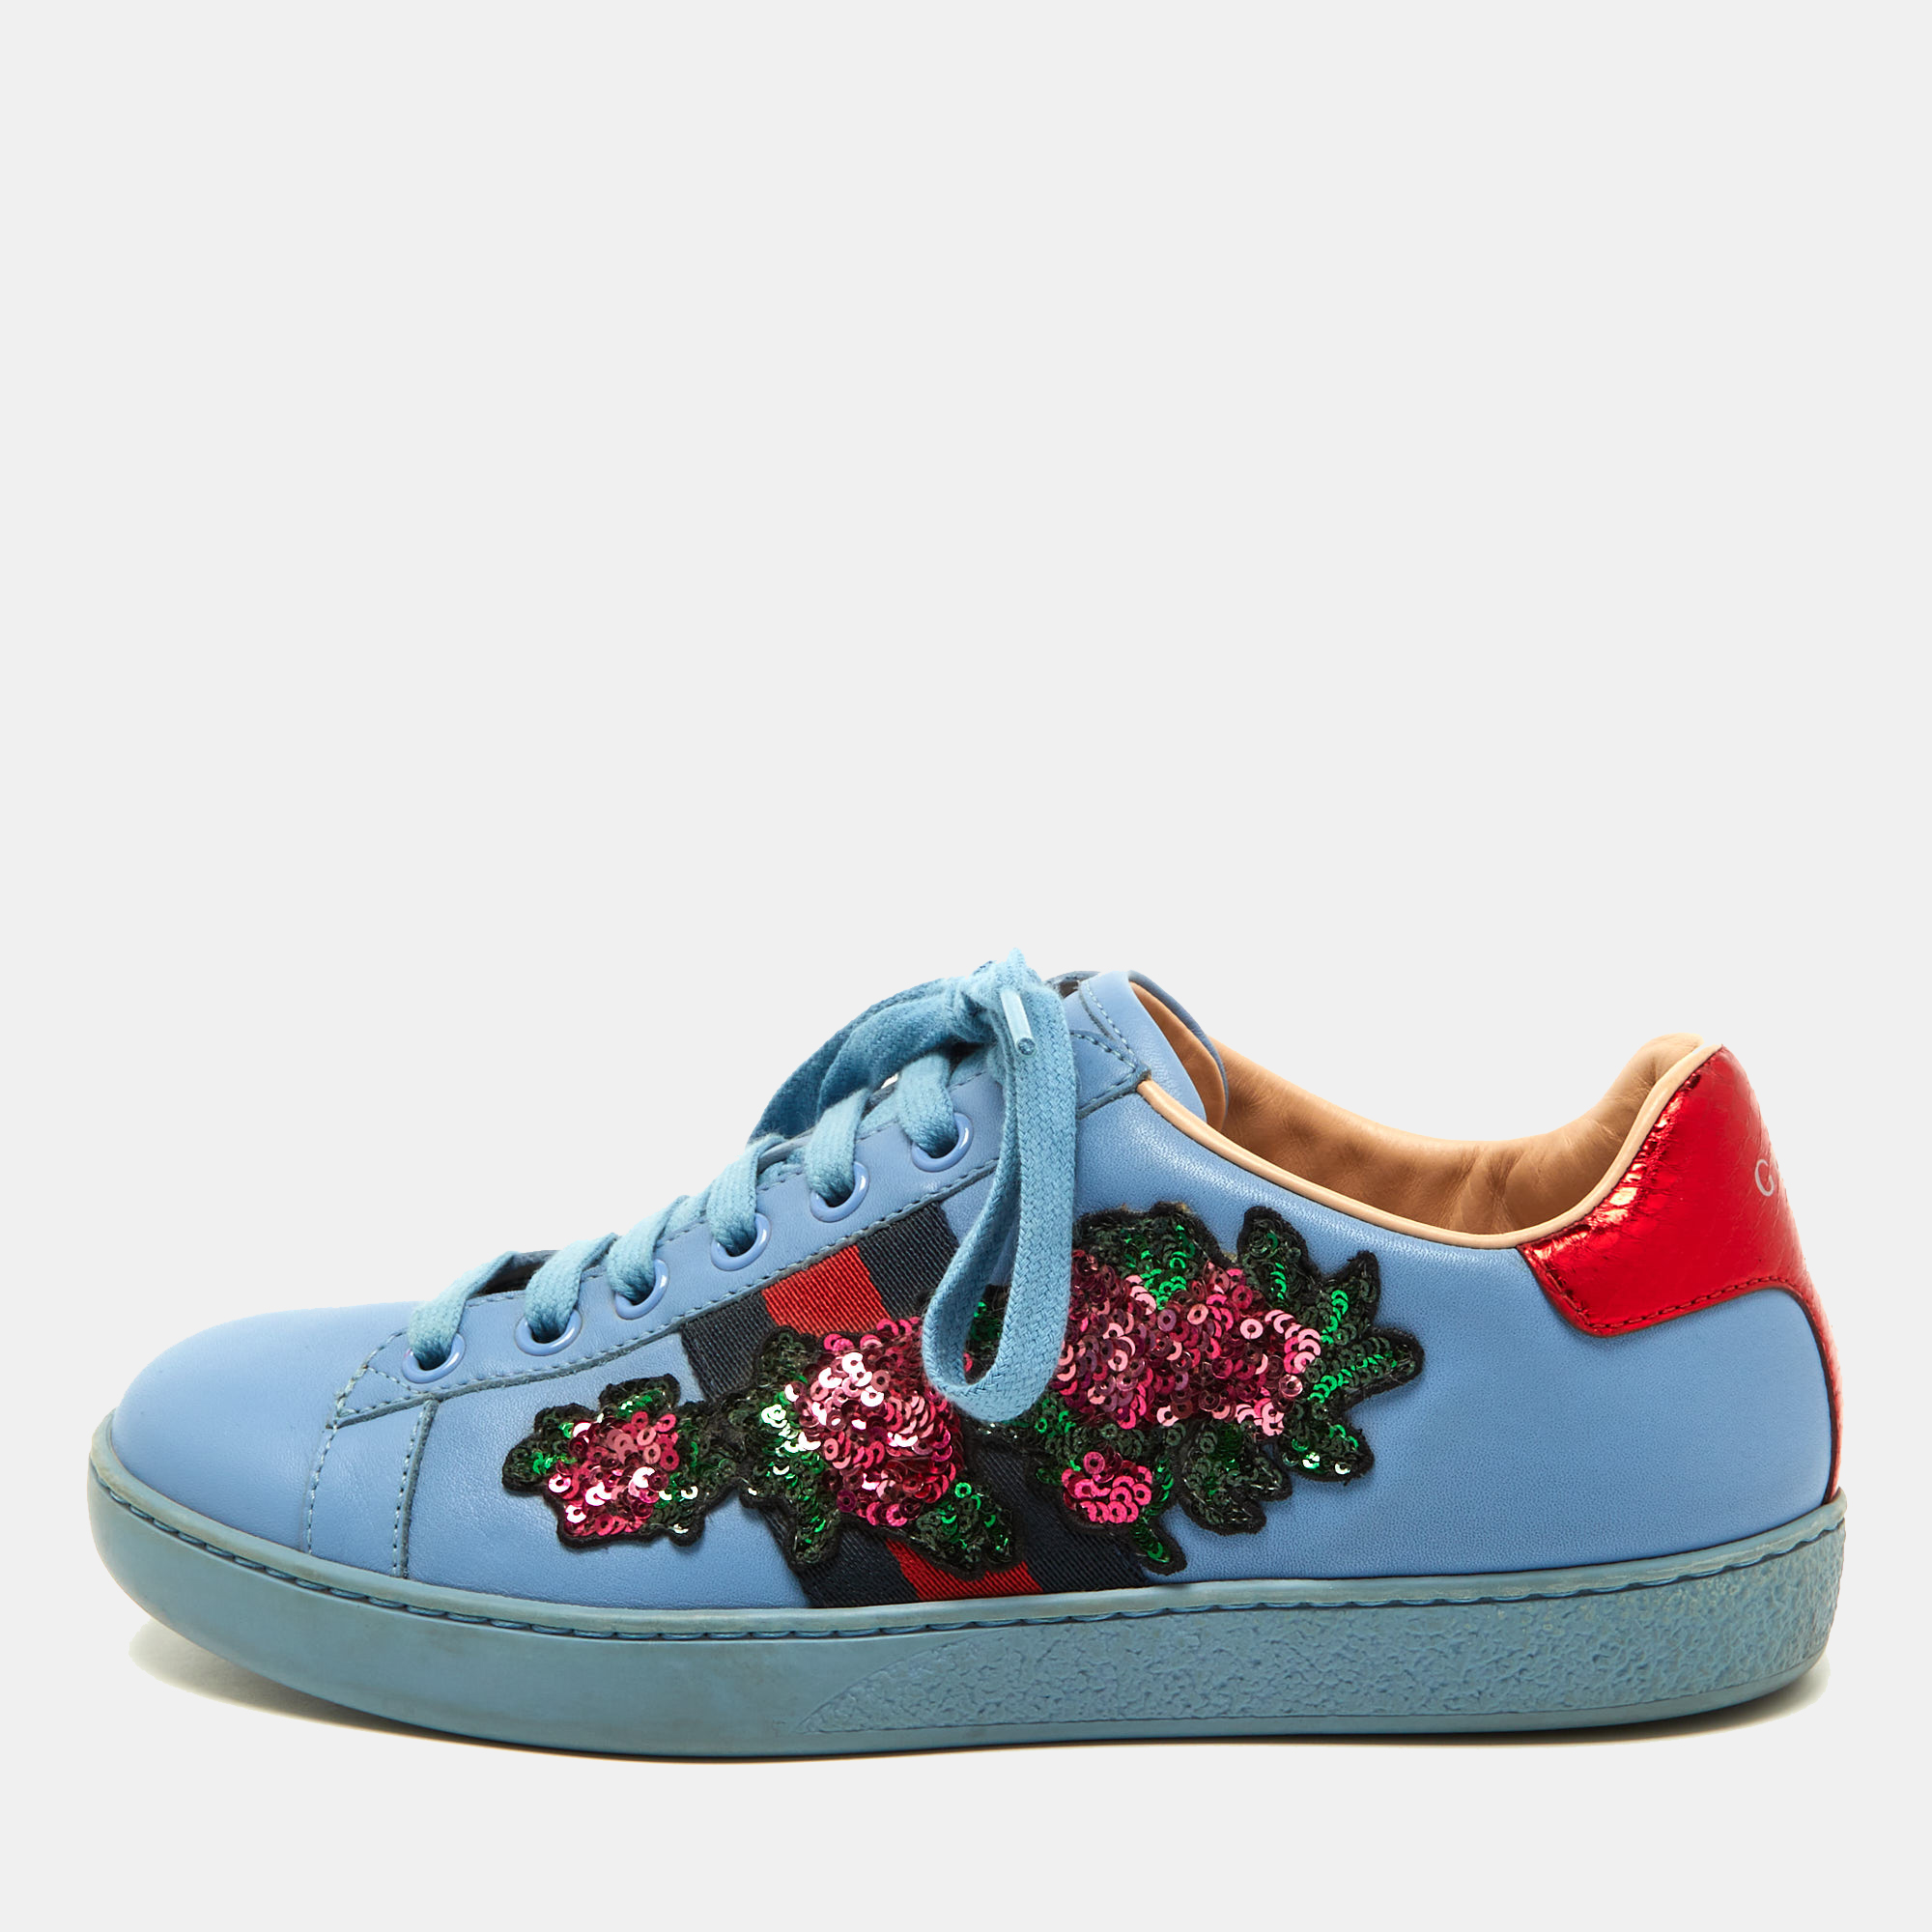 Pre-owned Gucci Blue Leather Flower Sequins Embellished Ace Low Top Sneakers Size 36